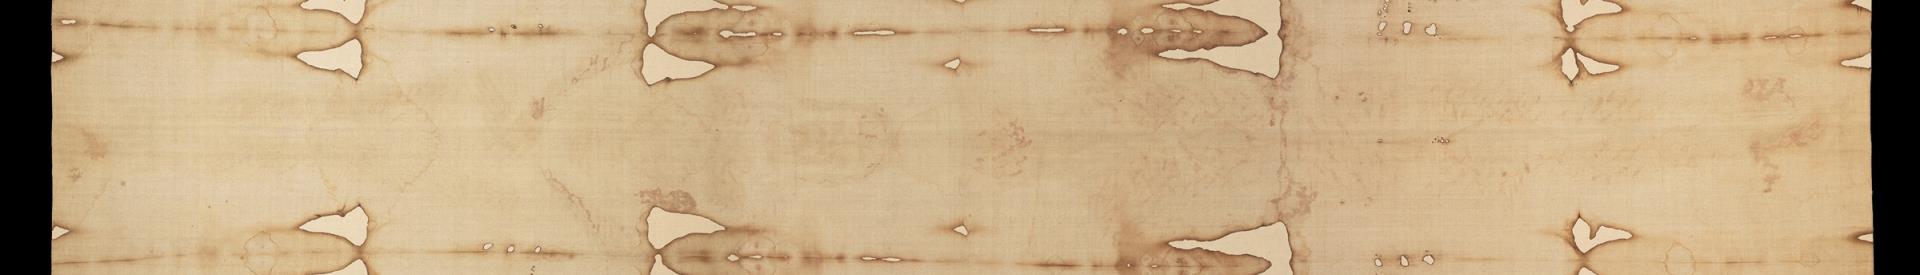 The Holy Shroud is kept in the Turin cathedral. According to tradition this is the Sheet mentioned in the Gospels which served to wrap the body of Jesus in the Tomb.